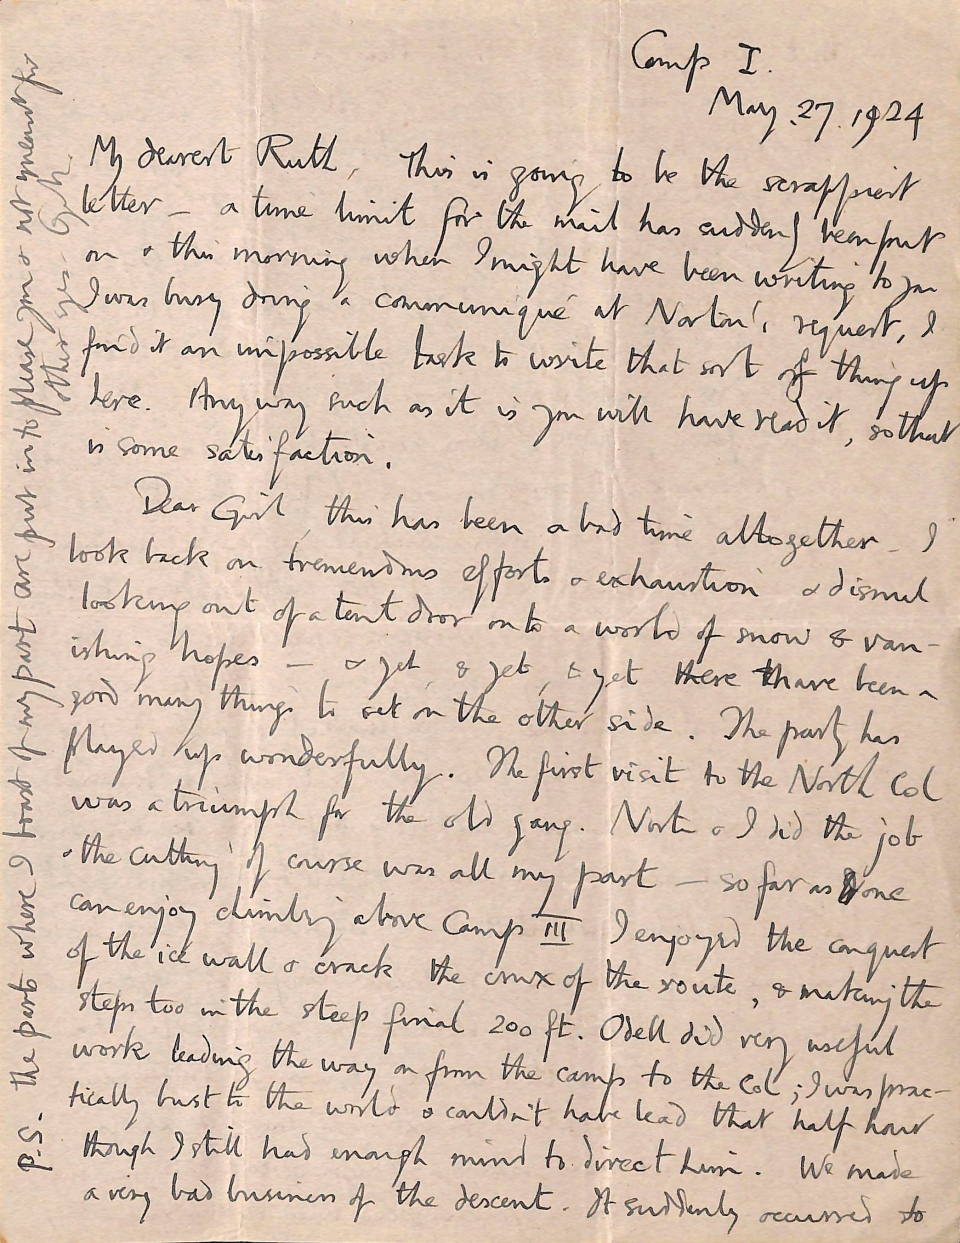 Mountaineer George Mallory's Everest letters